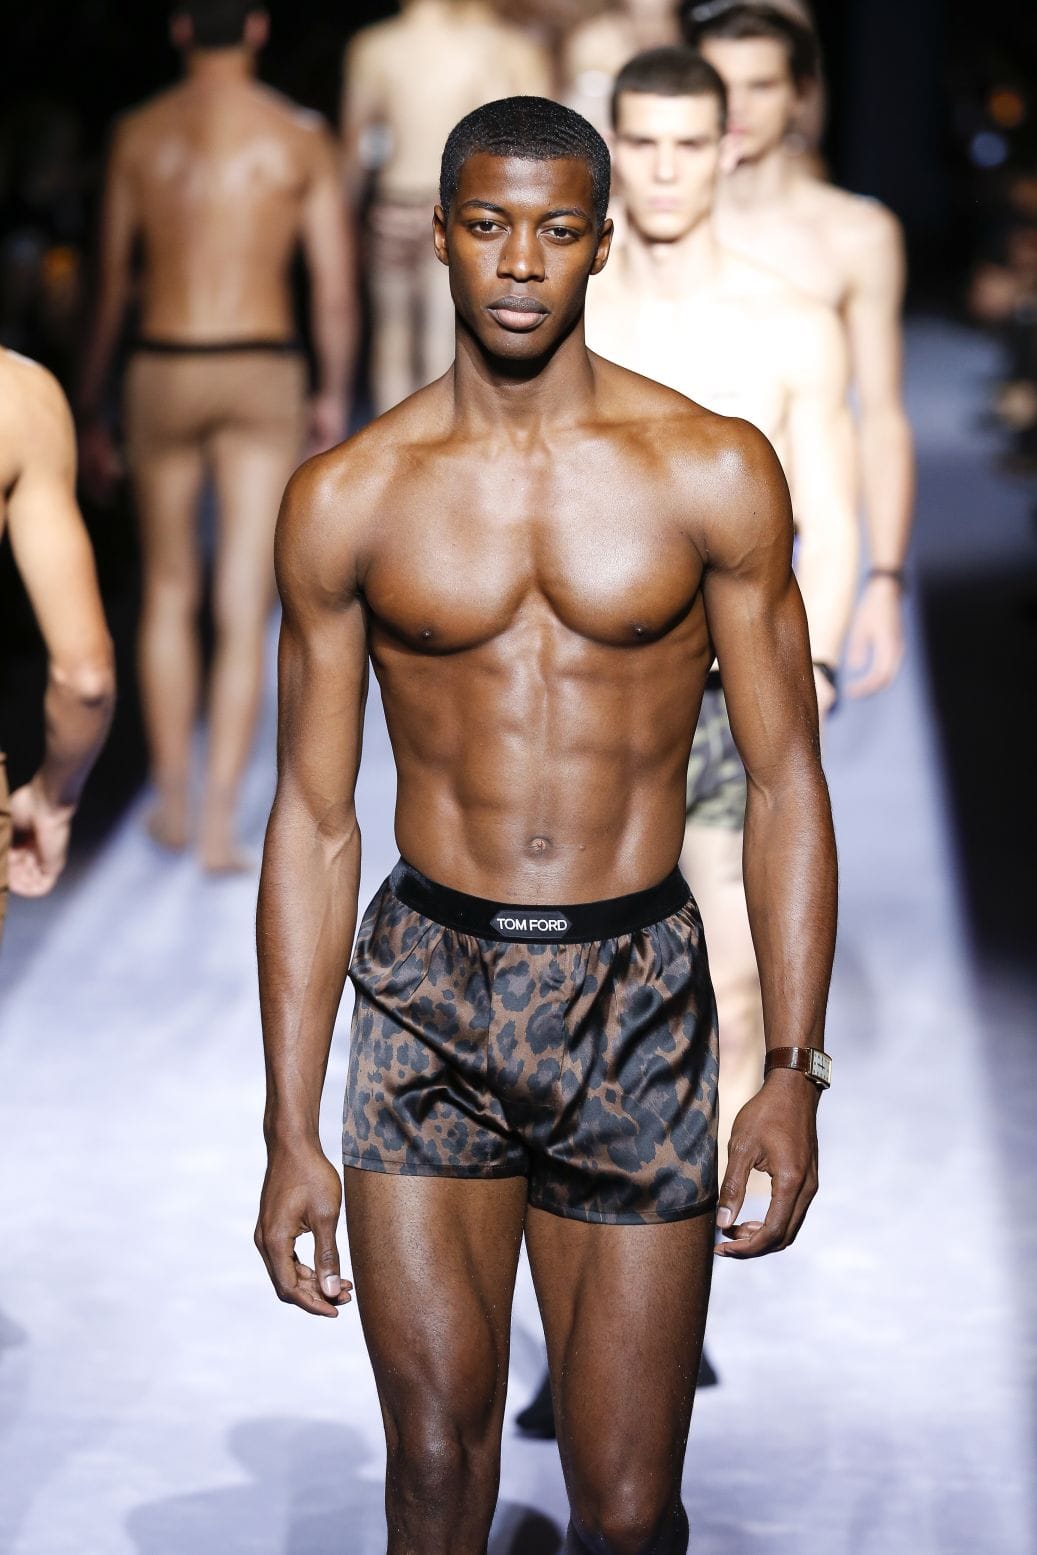 Tom Ford's first-ever men’s Fall/Winter runway show proves the perfect chance for the designer to debut his new Tom Ford 001 watch and underwear collections.